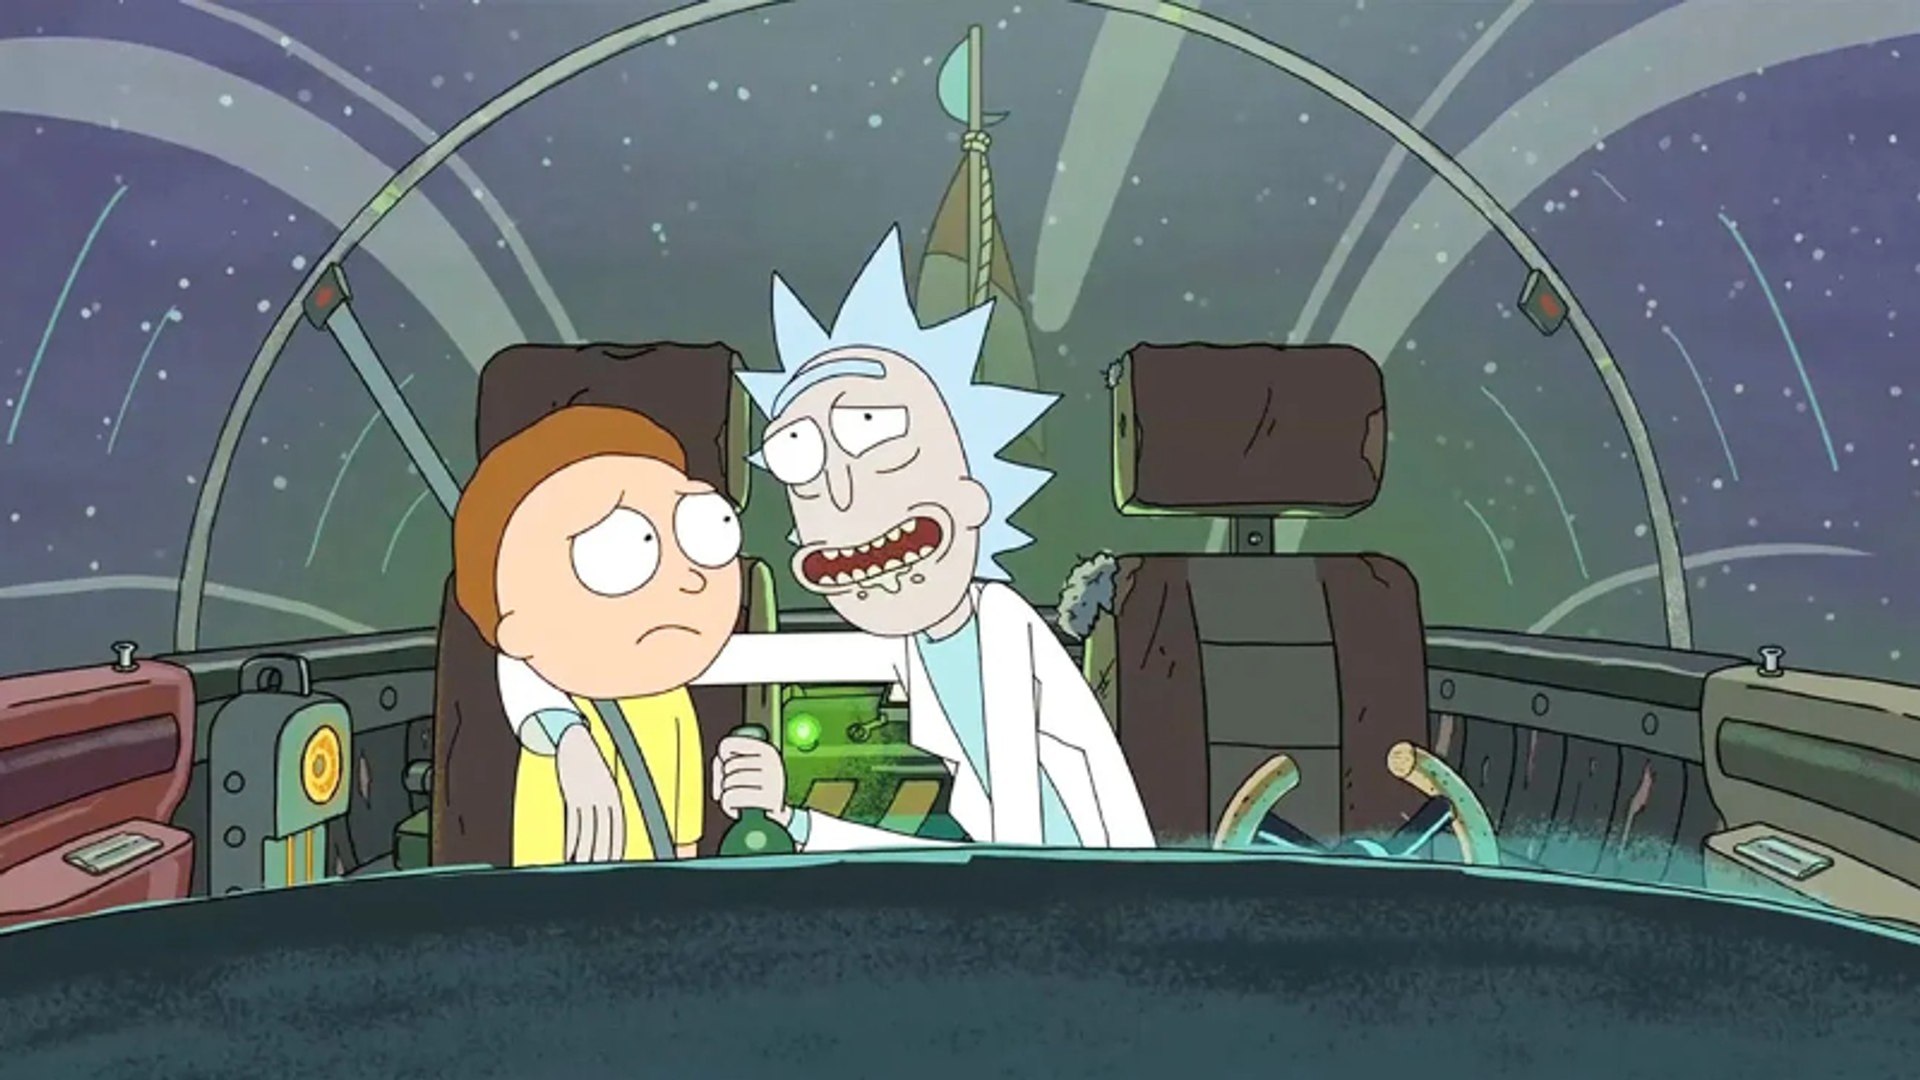 The latest Rick and Morty (season 3) videos on Dailymotion